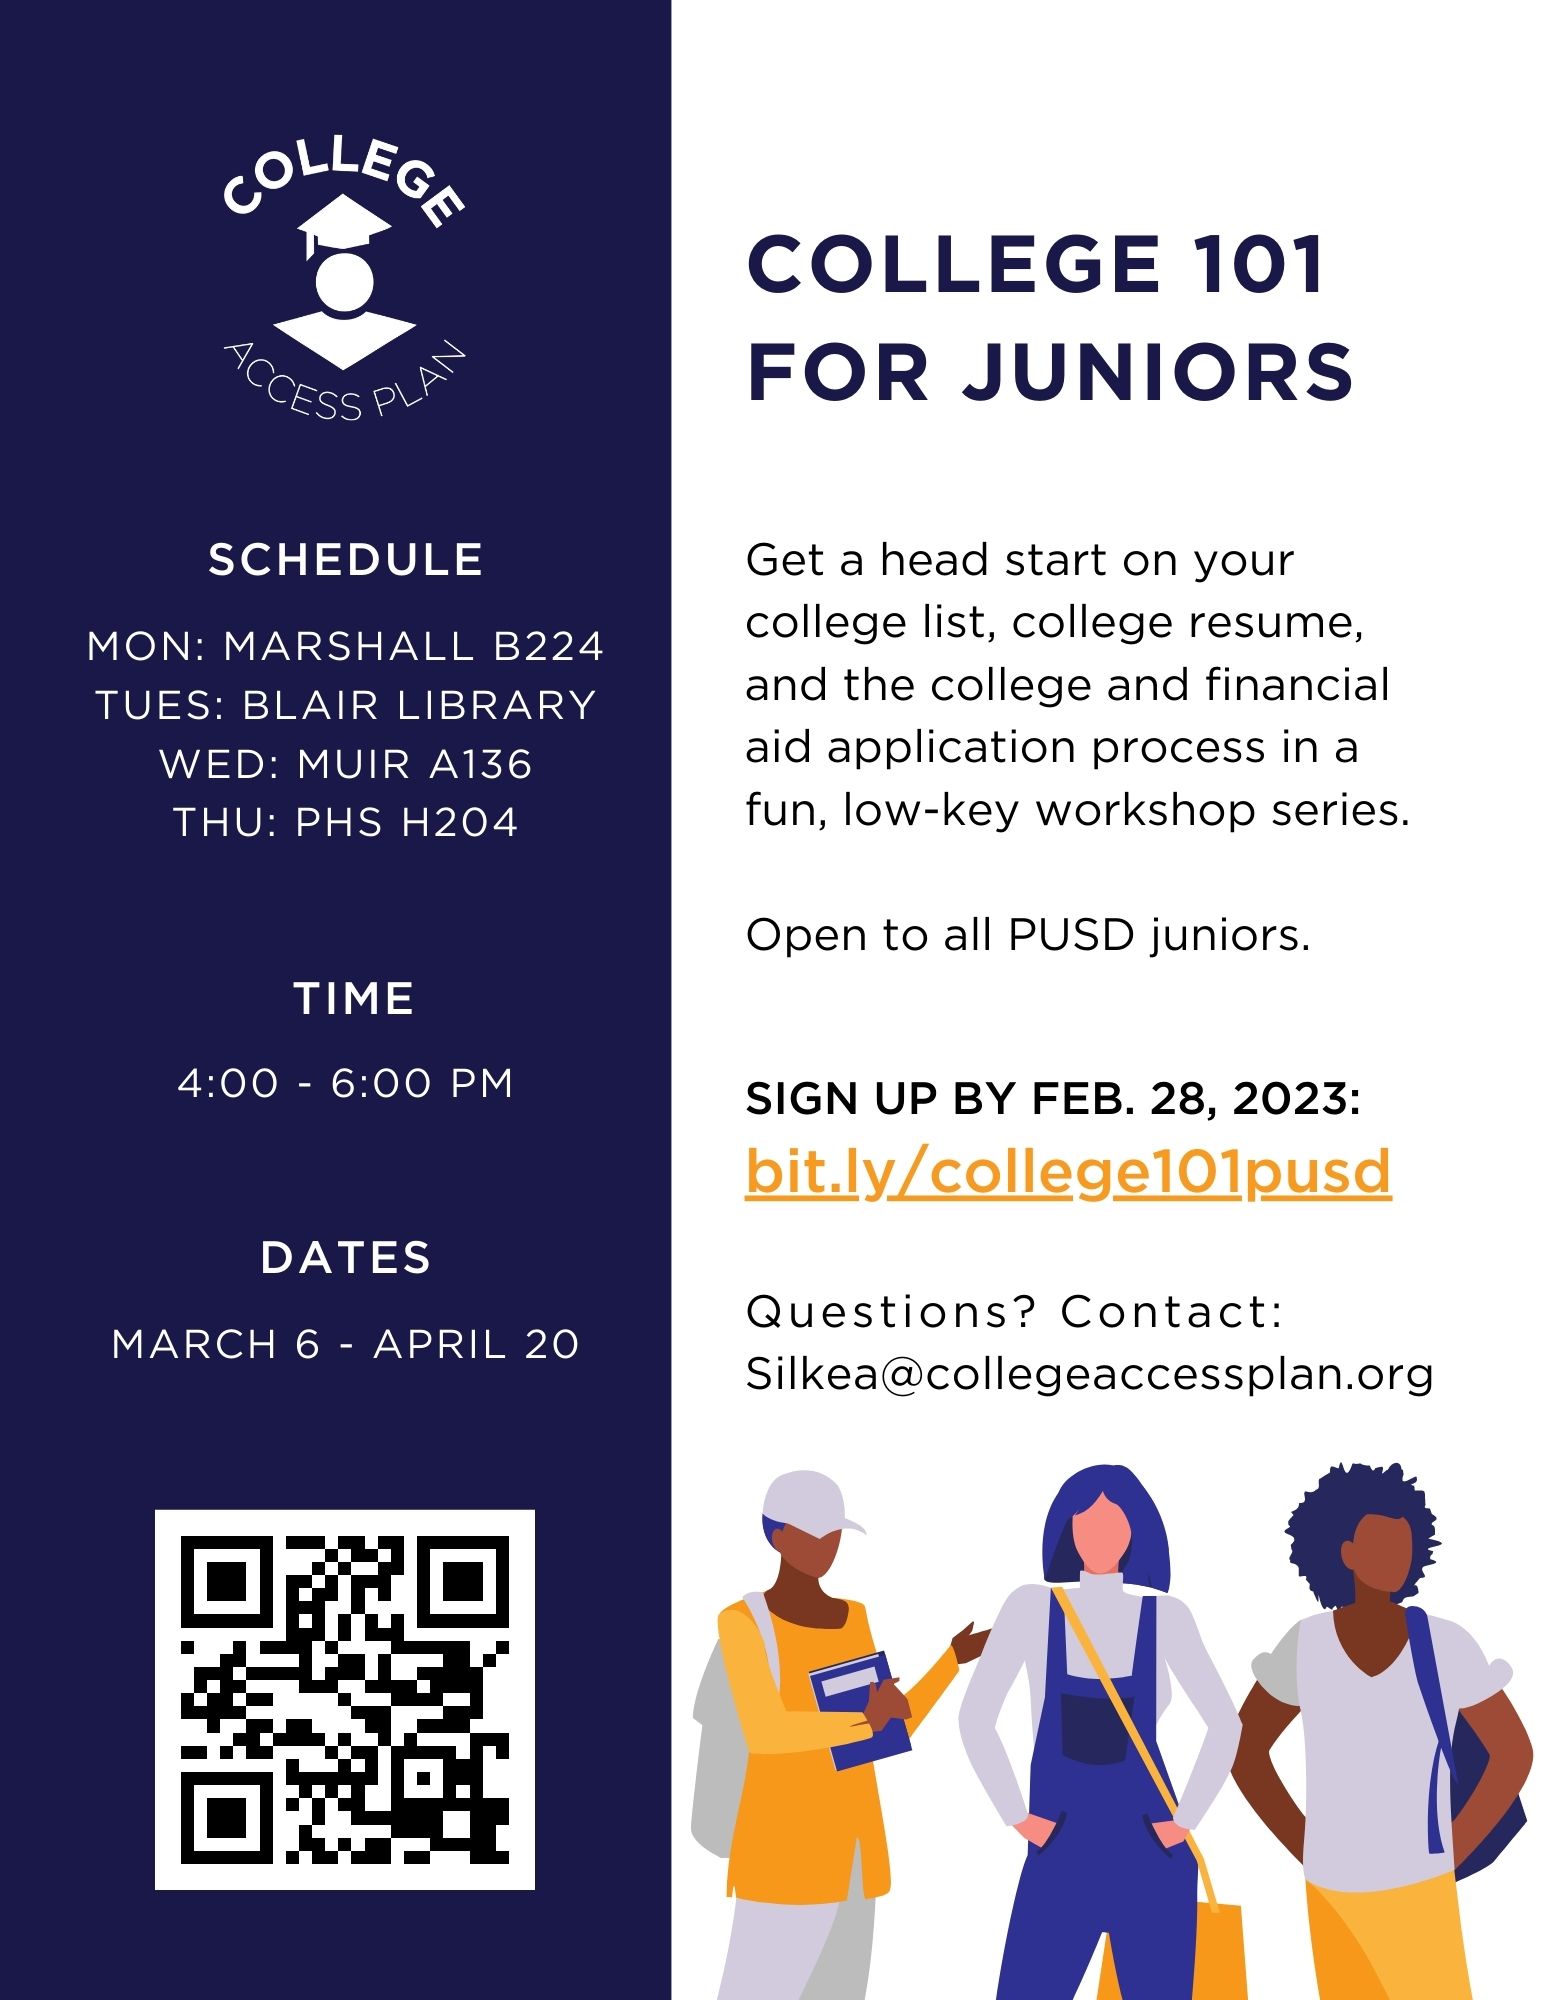 College Access Plan - African American Parent Council